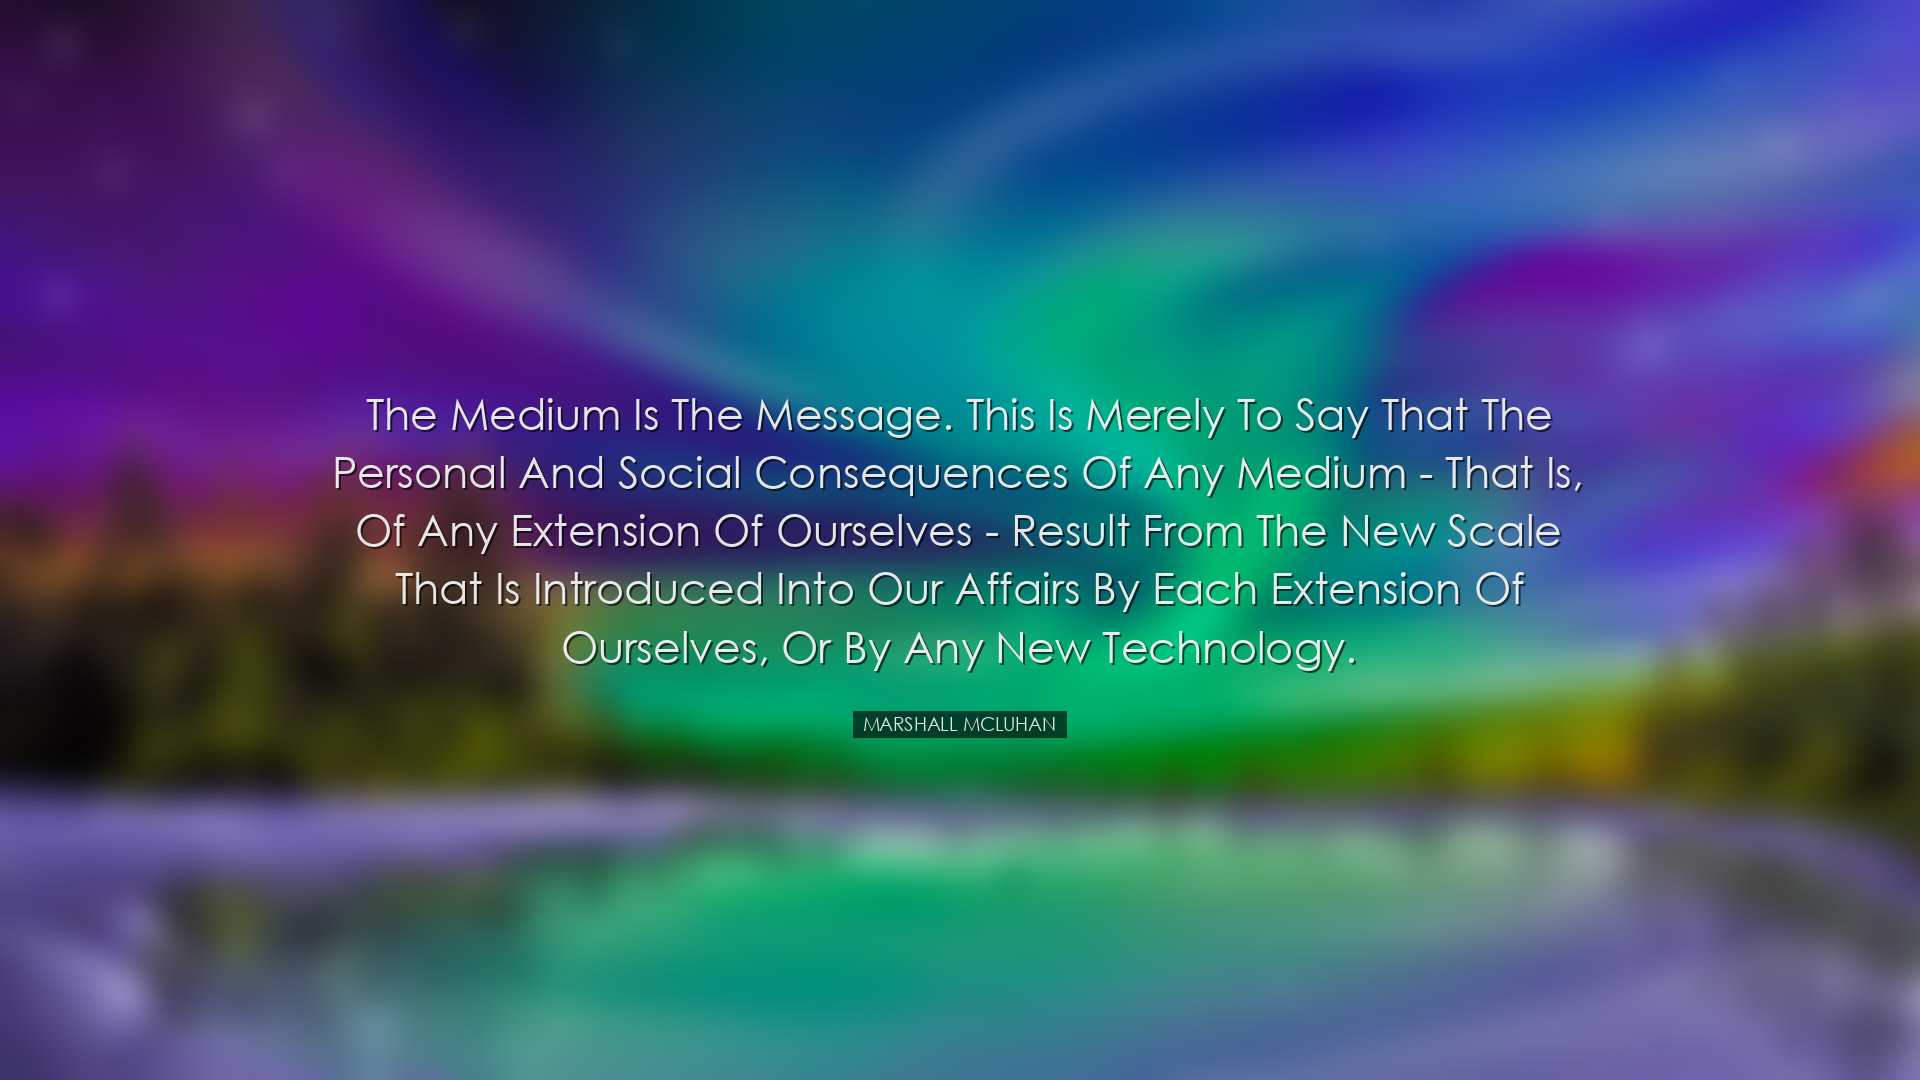 The medium is the message. This is merely to say that the personal